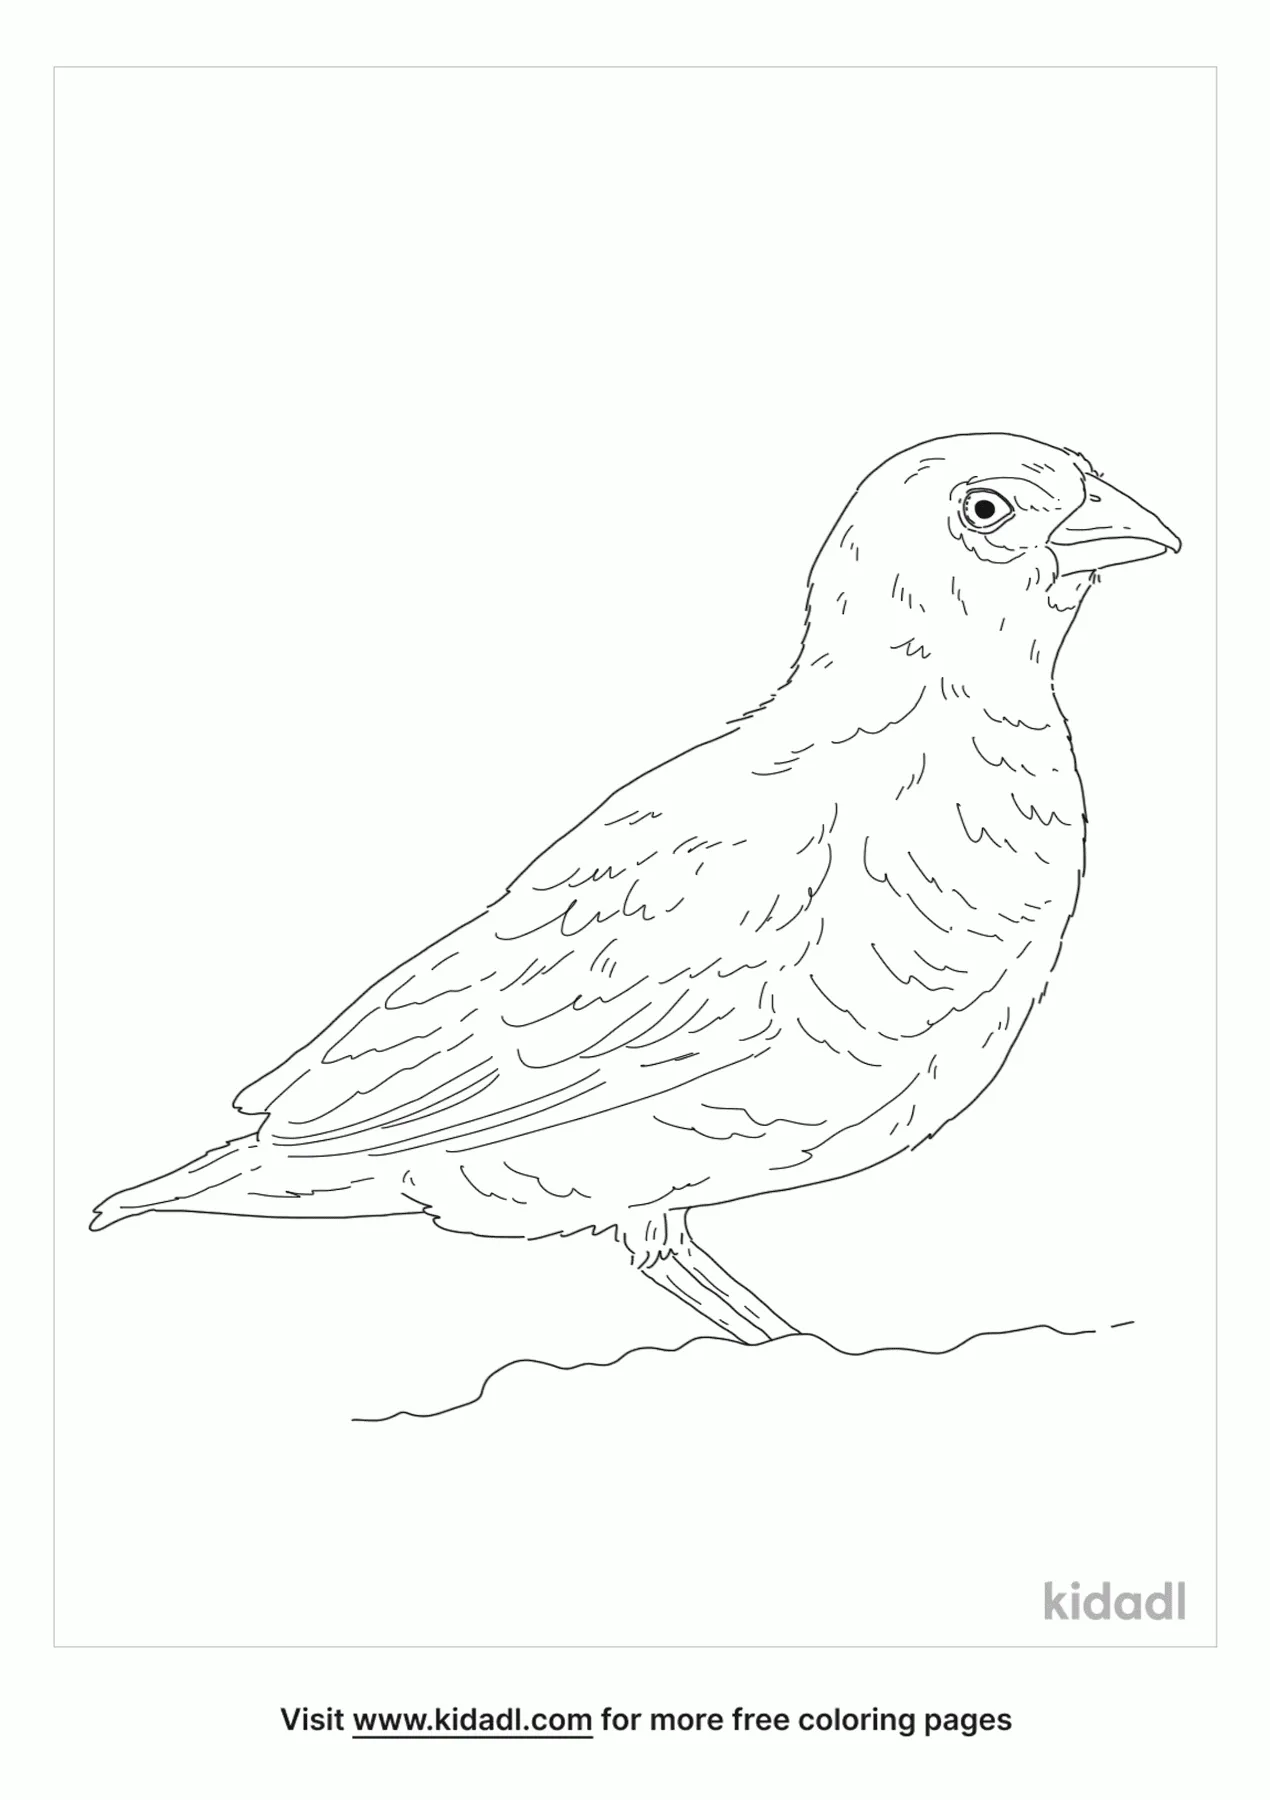 African Quailfinch Coloring Page